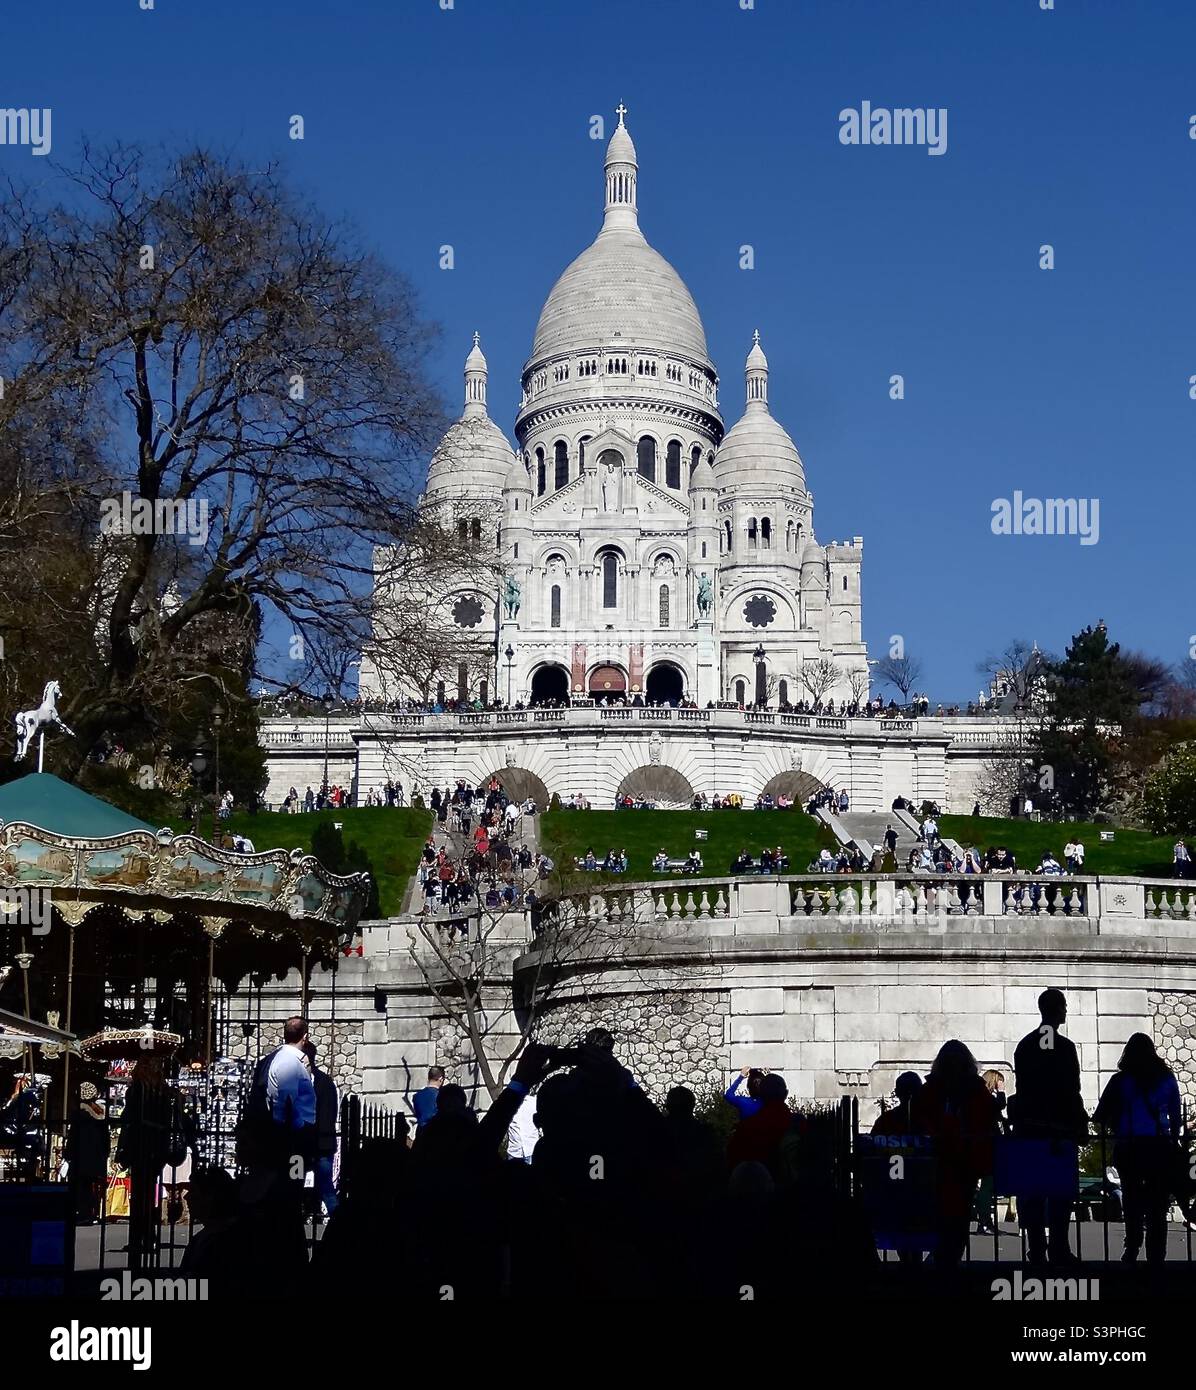 Basilica of Sacre-Coeur in Paris, France, seen from the bass of the butte of Montmartre. It is 131m high (430 feet) and has 5 domes. A children’s carousel and silhouetted figures are seen below. Stock Photo